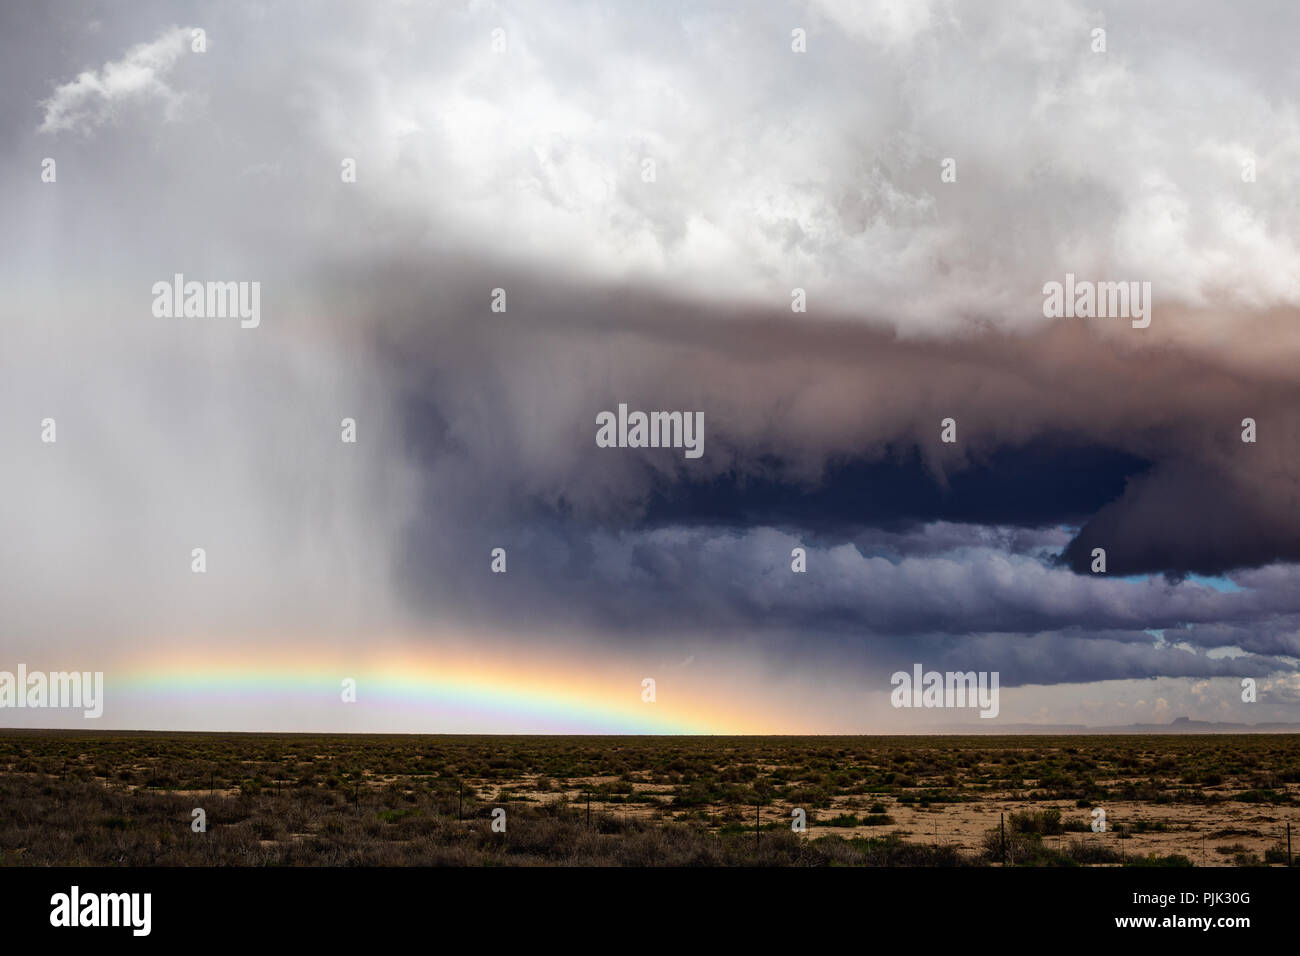 A wall cloud beneath the mesocyclone of a supercell thunderstorm with dramatic hail core in Arizona Stock Photo